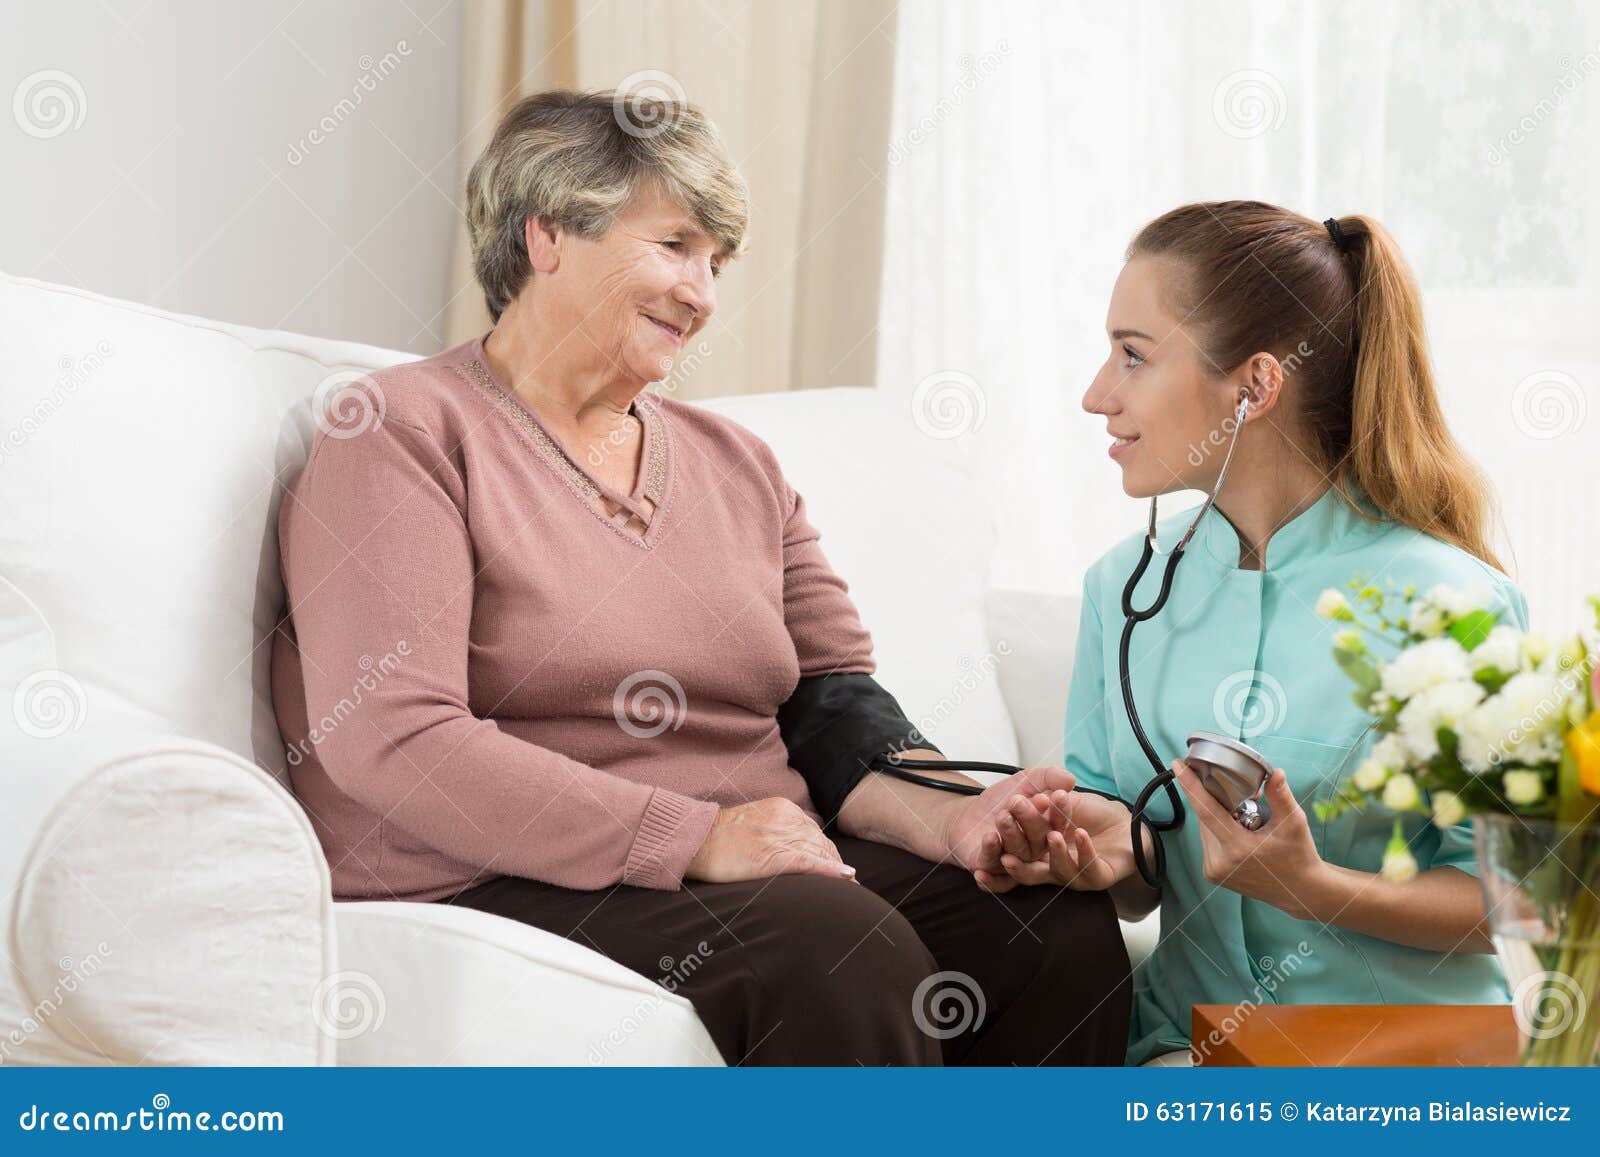 care assistant in nursing home